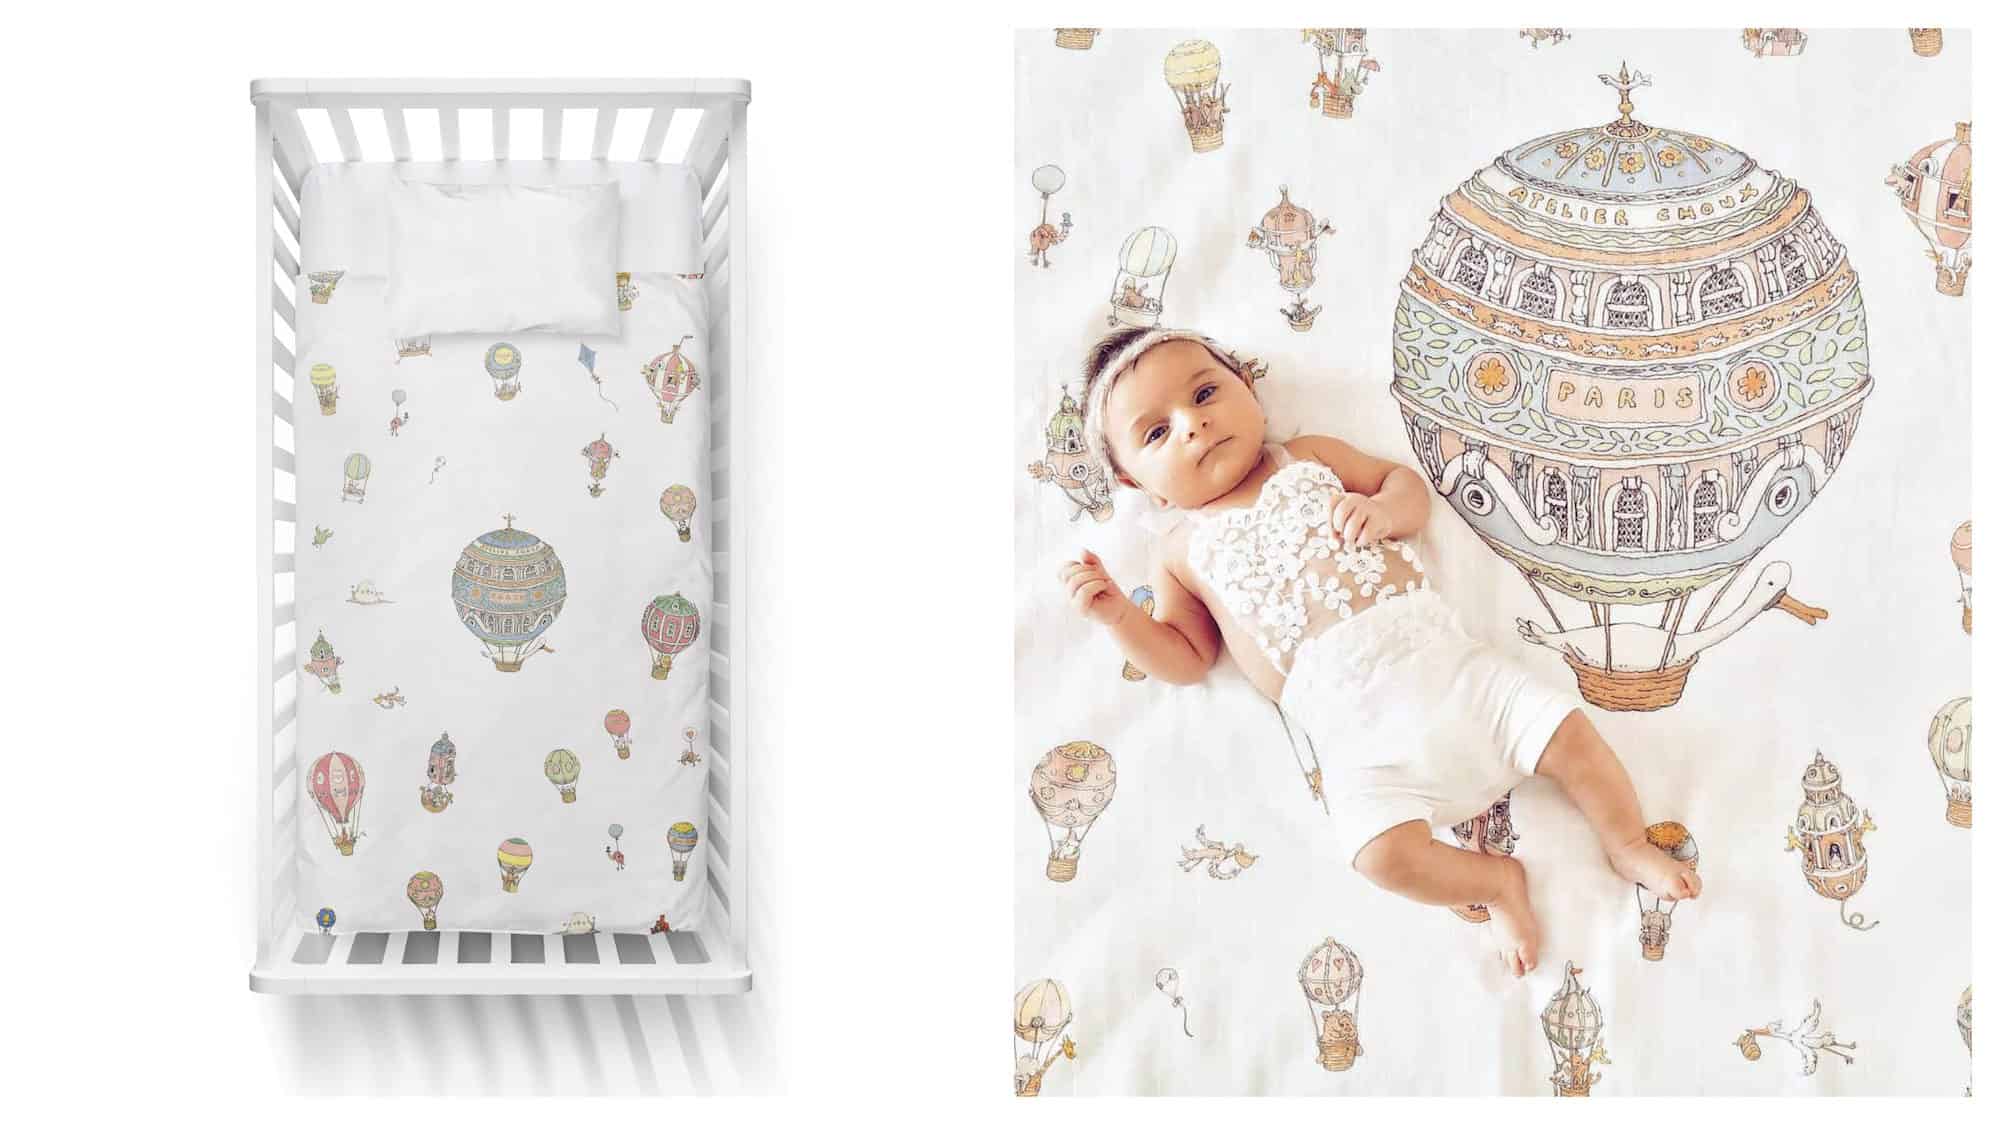 A crib with a patterned mattress with hot air balloons on it from Atelier Choux (left). A baby lying on a hot air balloon blanket (right).